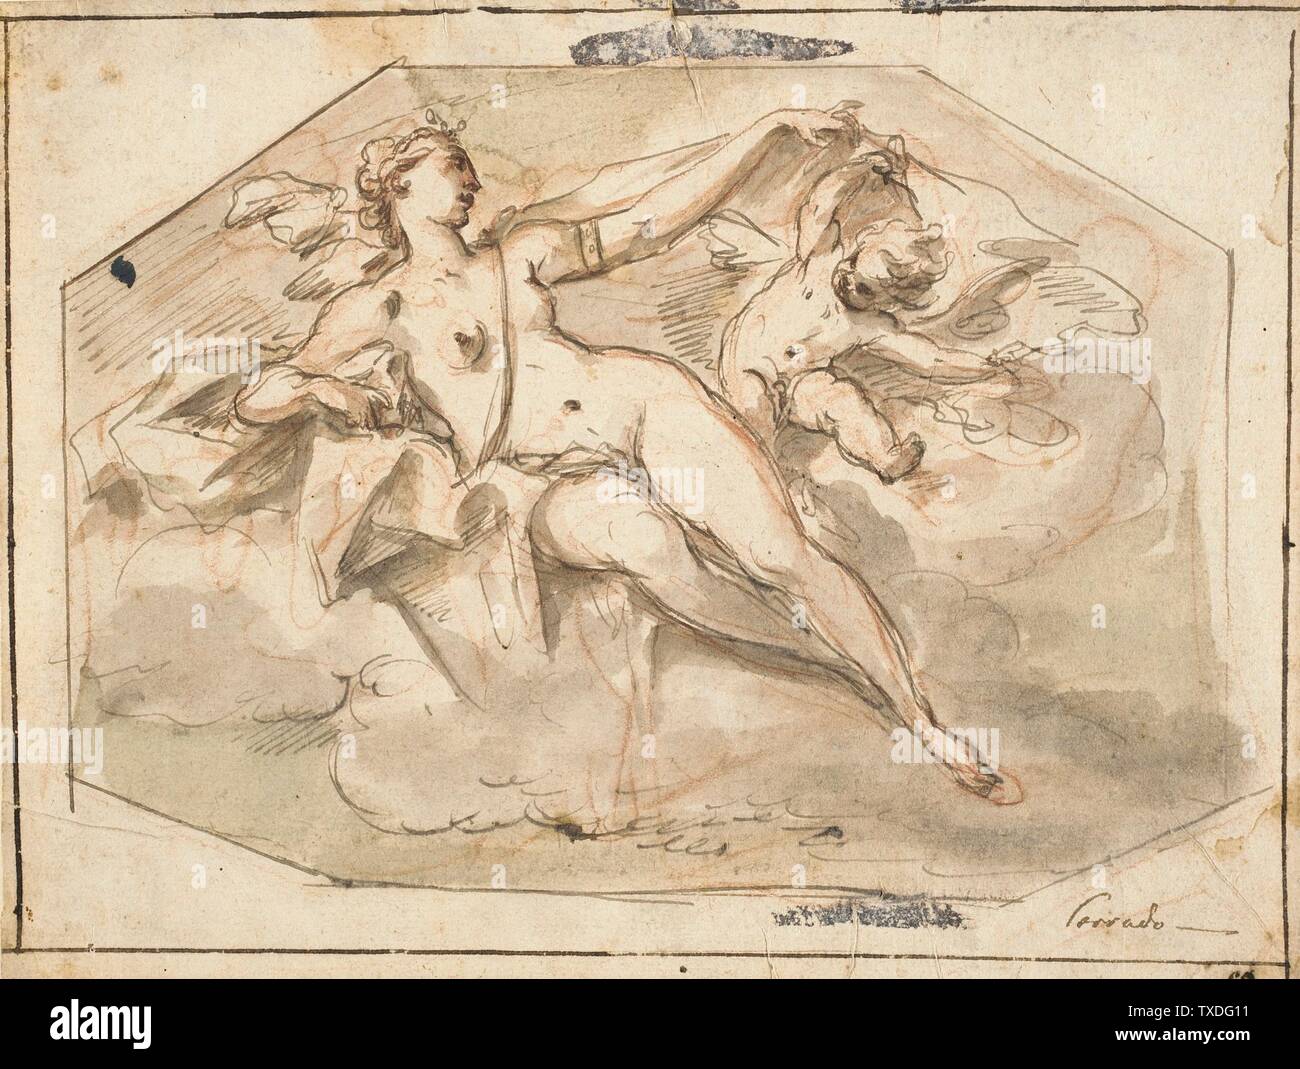 Venus and Cupid;  Italy, circa 1746-1747 Drawings Sanguine with dark gray ink, gray and bluish wash Los Angeles County Fund (54.12.12) Prints and Drawings; between circa 1746 and circa 1747 date QS:P571,+1746-00-00T00:00:00Z/8,P1319,+1746-00-00T00:00:00Z/9,P1326,+1747-00-00T00:00:00Z/9,P1480,Q5727902; Stock Photo